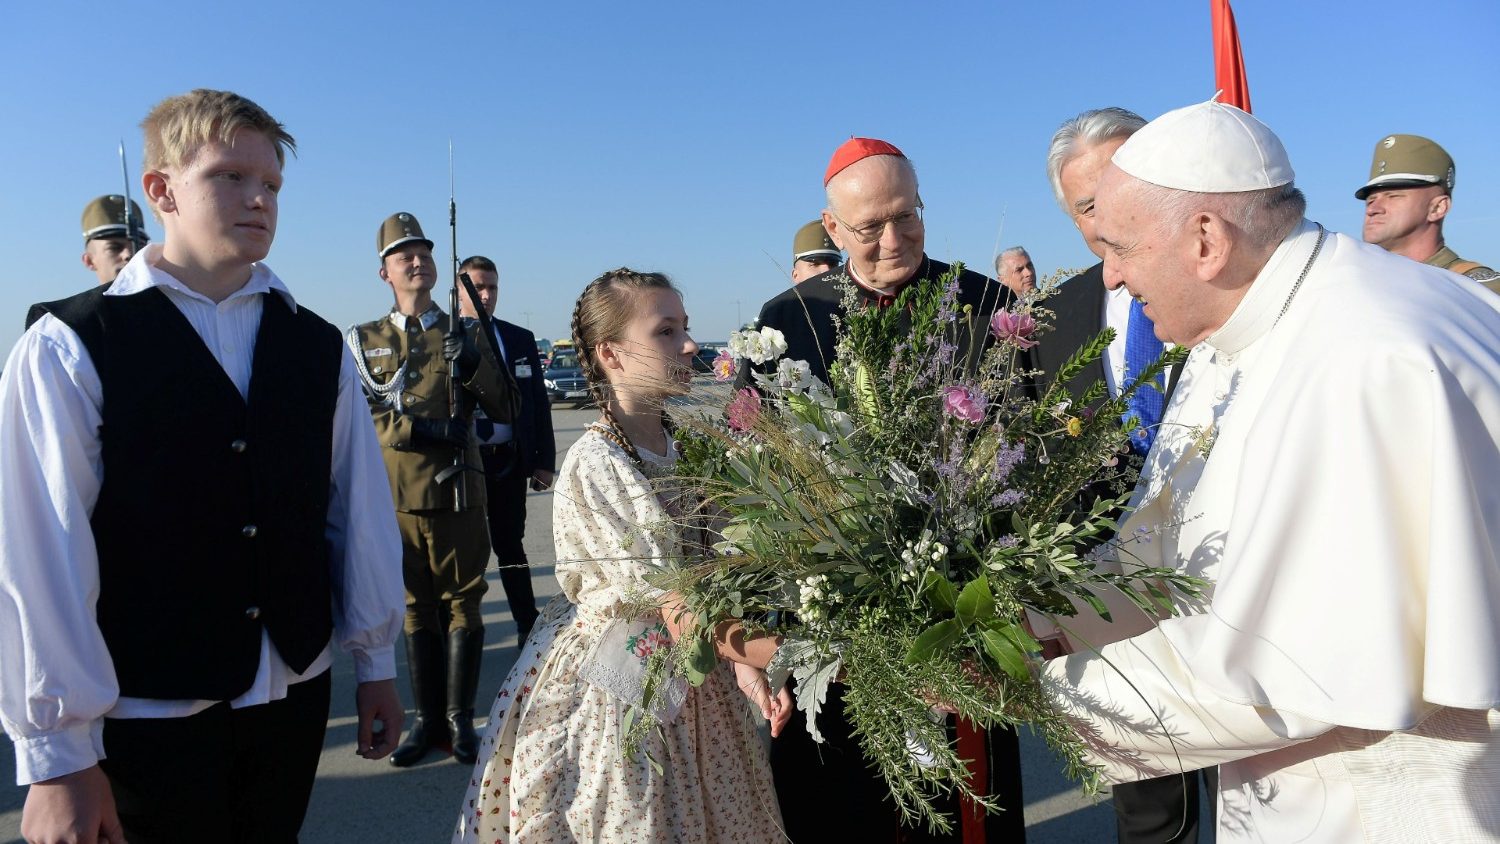 Pope Francis to make Apostolic Journey to Hungary in April - Vatican News